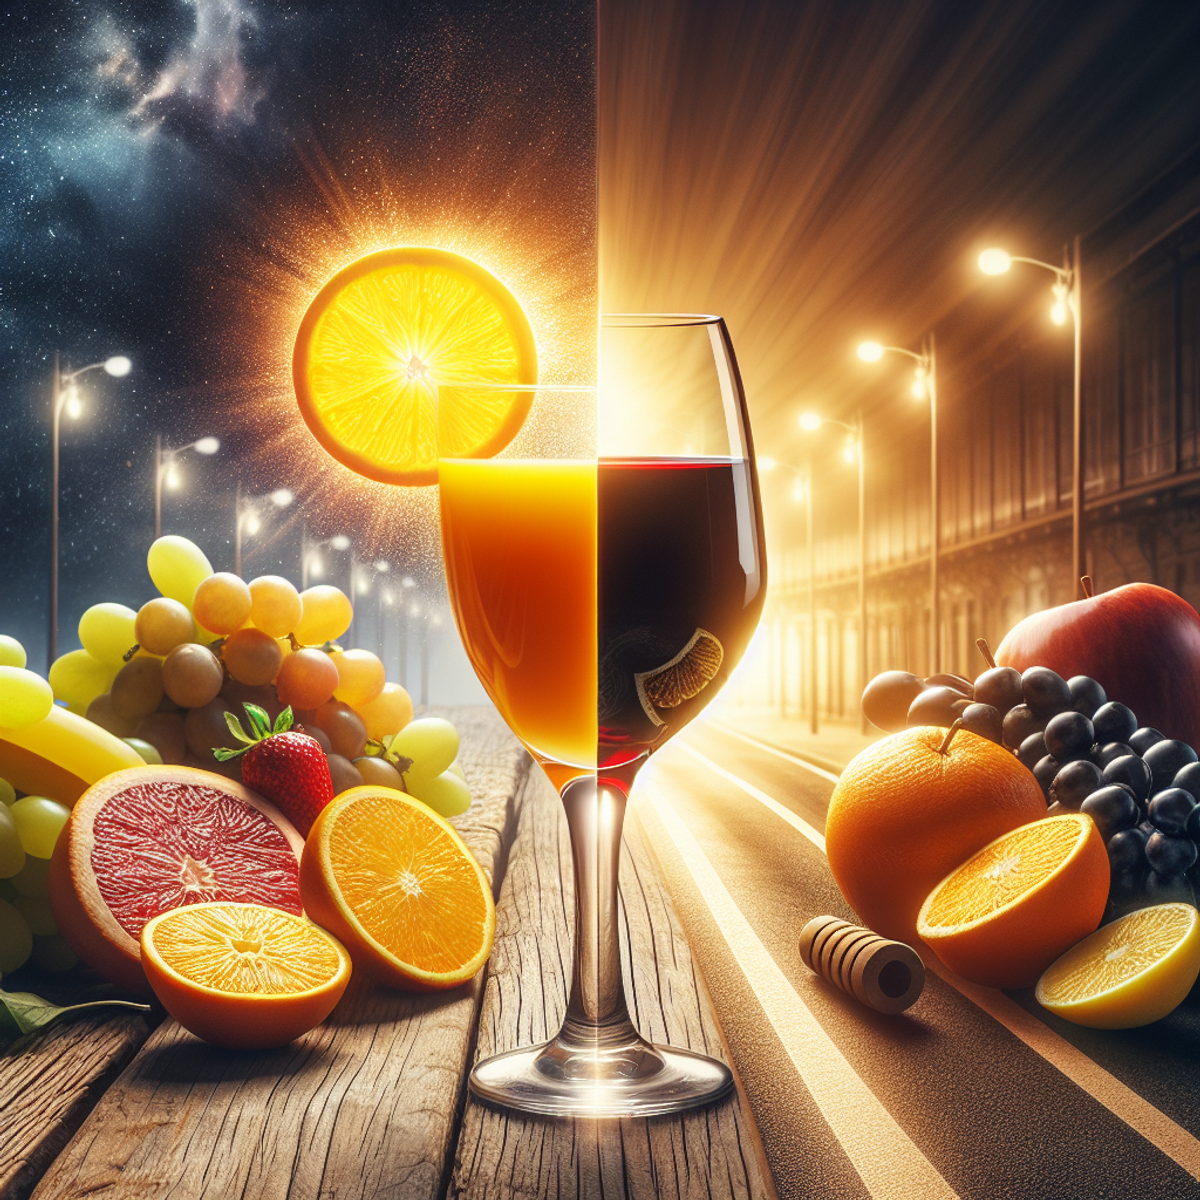 A glass of fresh orange juice and a glass of red wine placed side by side on a wooden table, with a background divided into two halves - one representing health and wellness, and the other depicting the potentially harmful aspects of drinking alcohol.